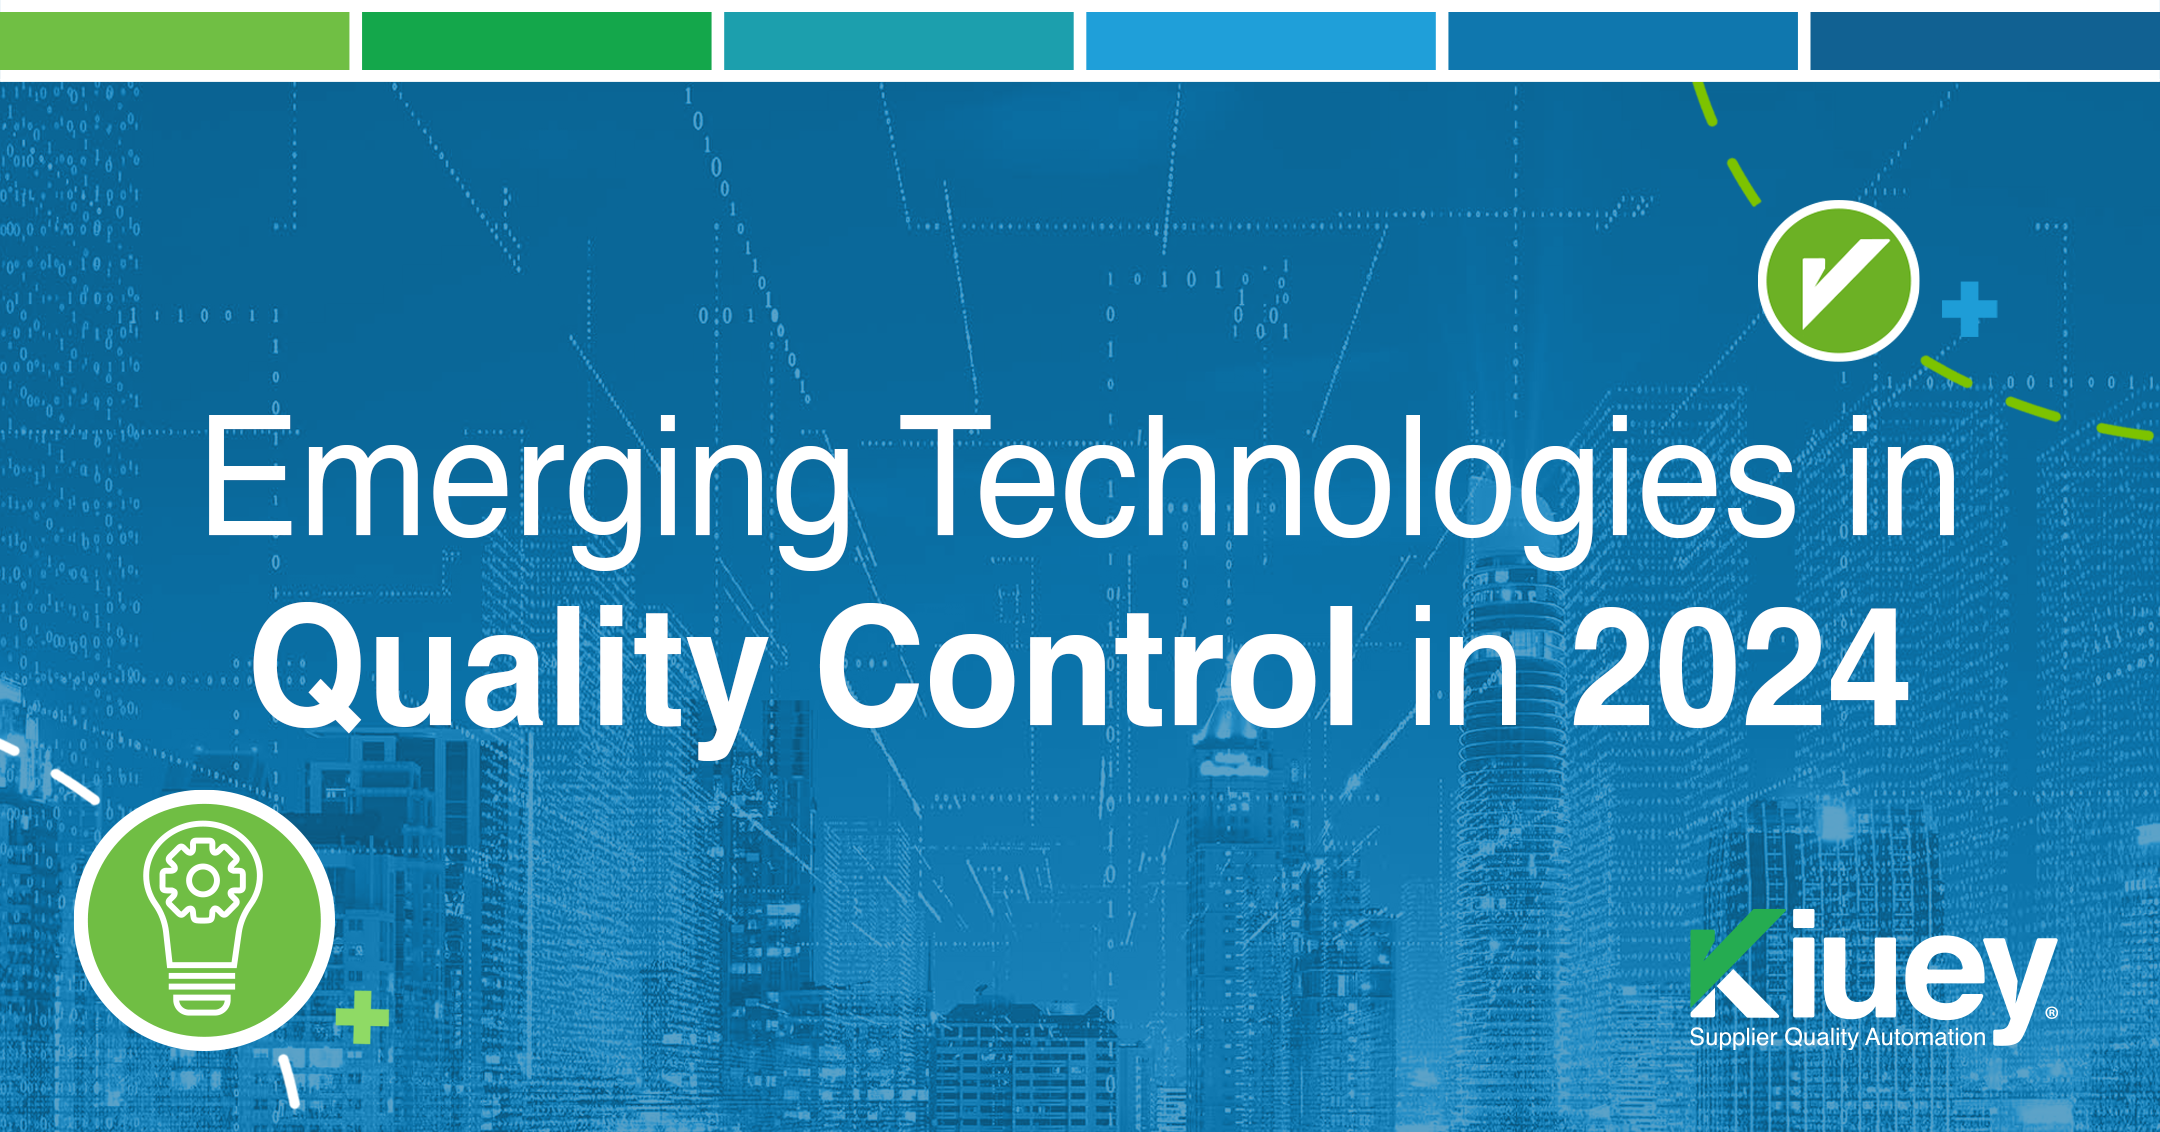 Emerging technologies in Quality Control in 2024